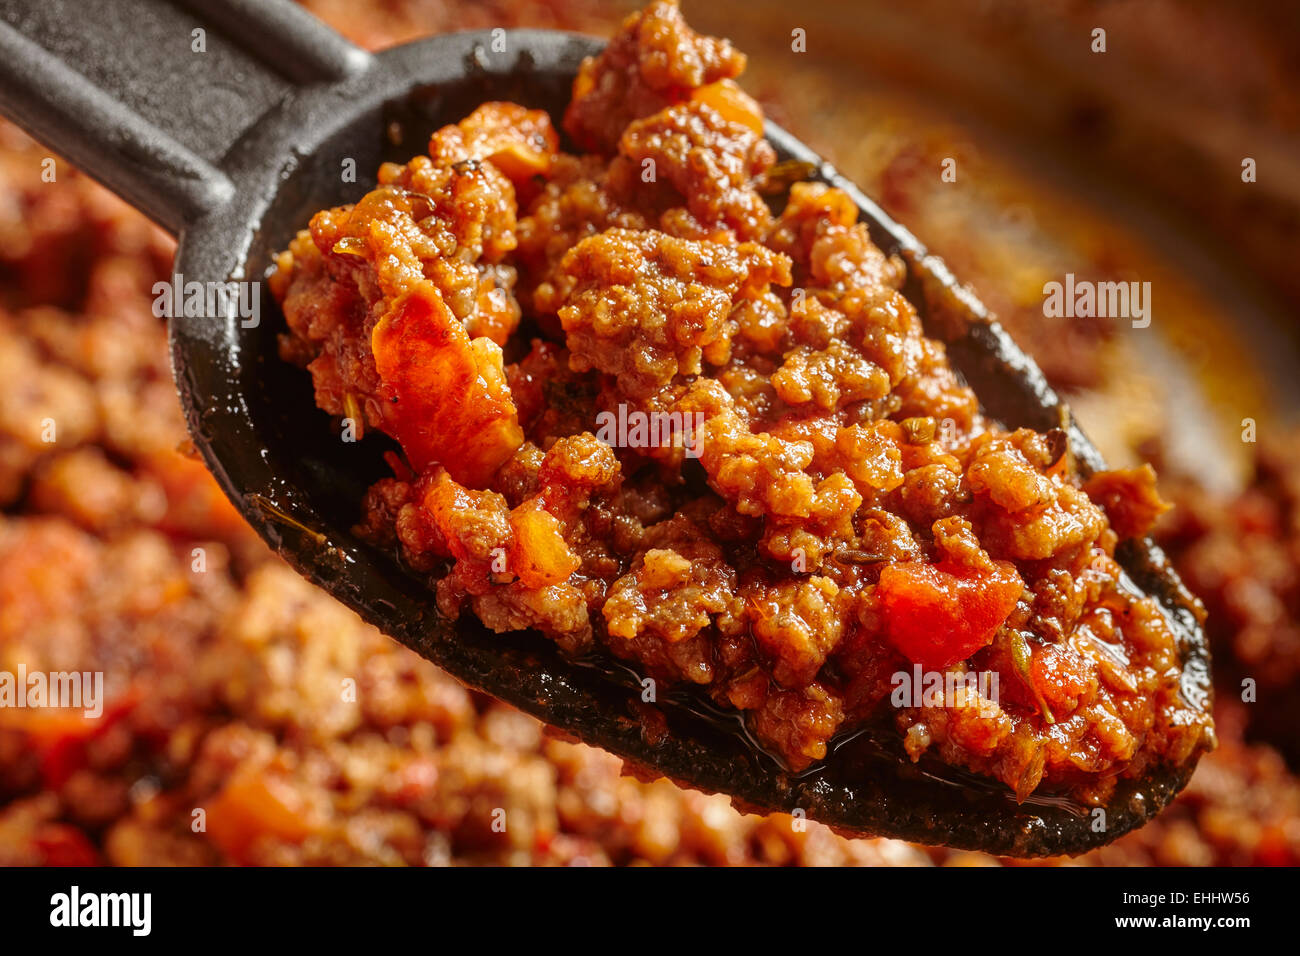 A Northern Italian Style Pasta Sauce With Ground Minced Beef And A Stock Photo Alamy